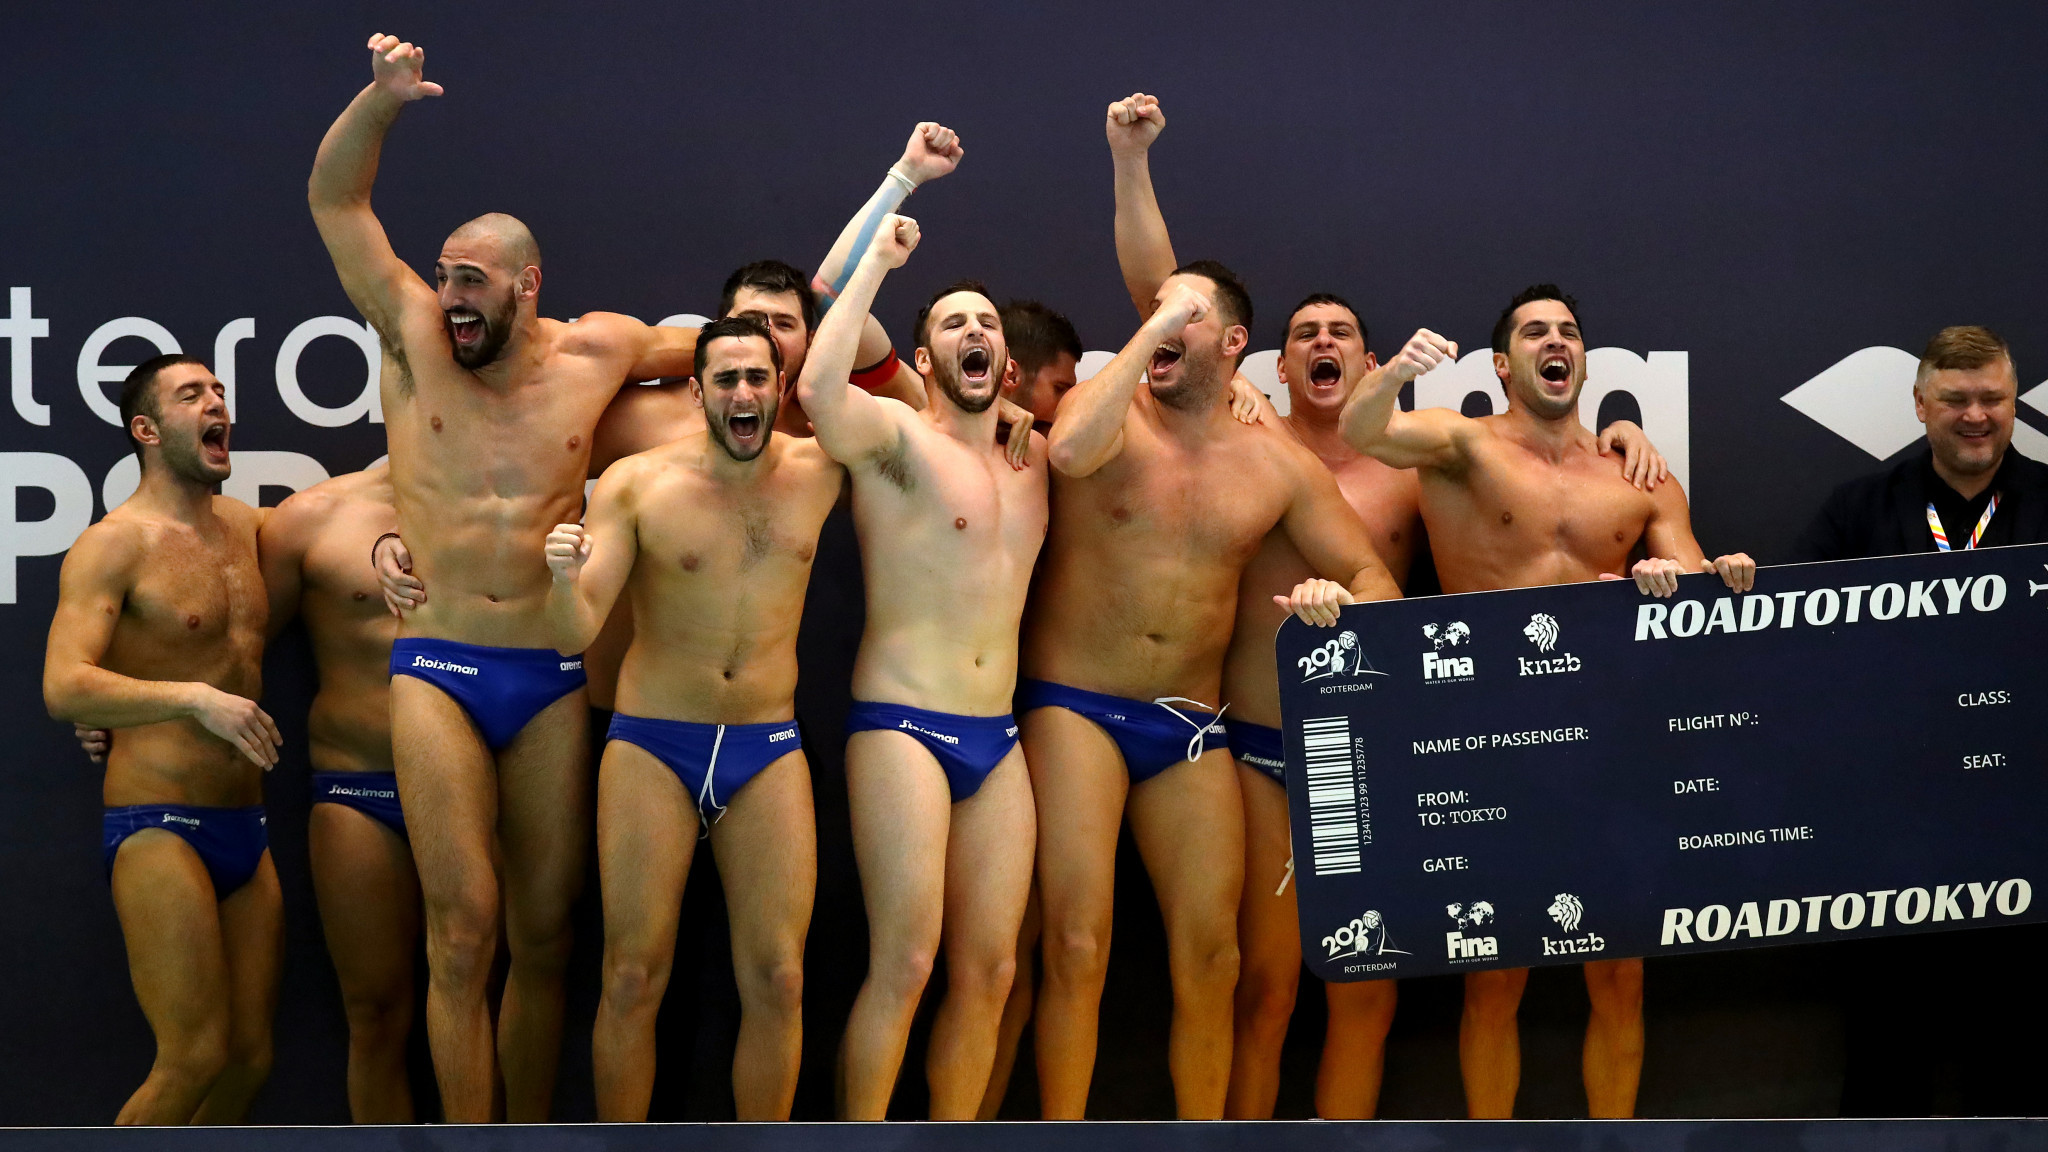 Montenegro and Greece reach Tokyo 2020 after making final of men’s Olympic water polo qualification tournament